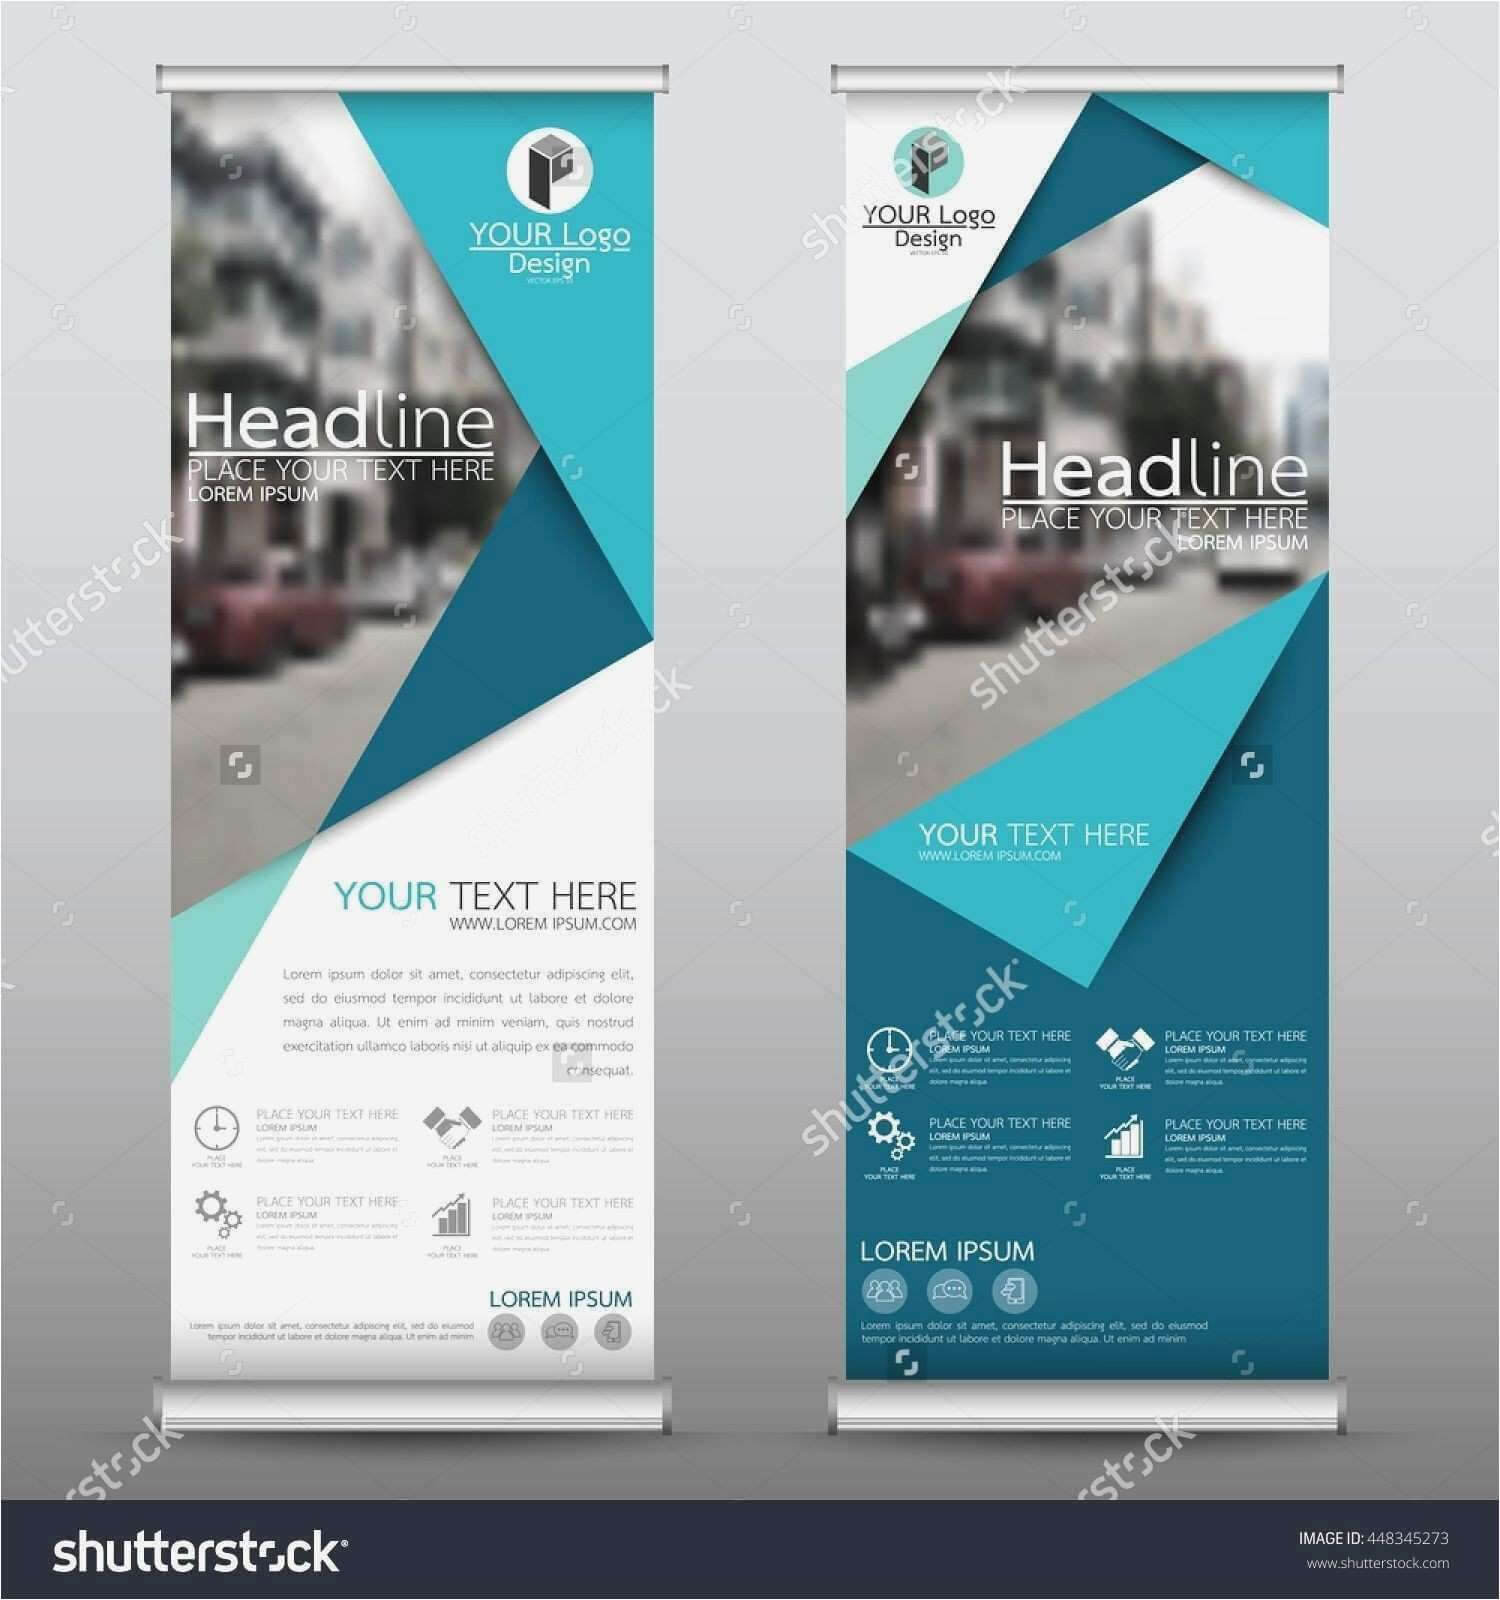 Business Flyer Templates Free Printable – Caquetapositivo With Regard To Free Brochure Templates For Word 2010